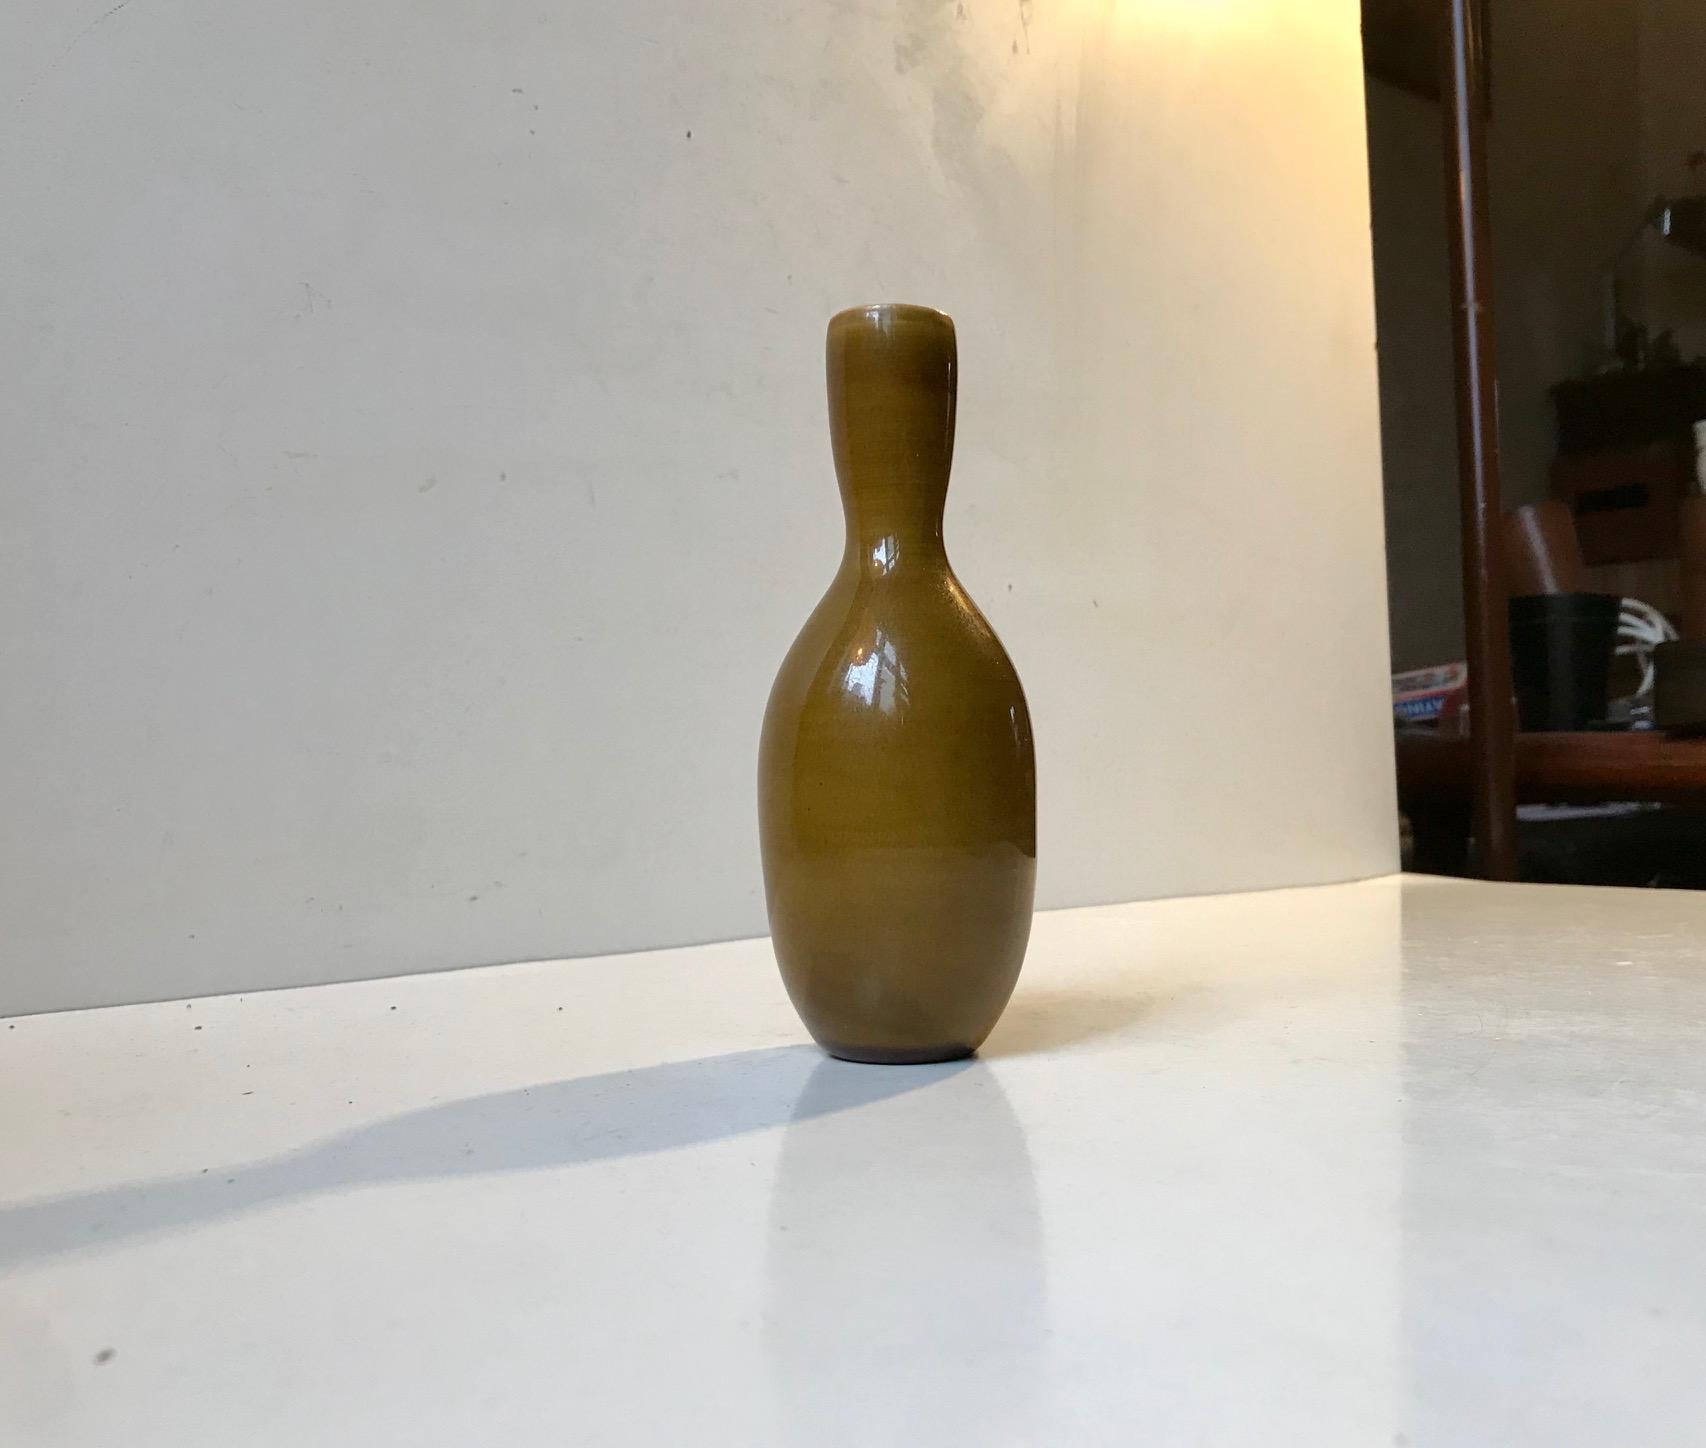 Organically shaped vase in pickle/olive green hares fur glaze. It’s a very early piece by Alfred Johansson who mastered ceramic modernism way earlier than Stalhane, Nylund and Friberg. Its hand signed to its base and marked Höganäs.